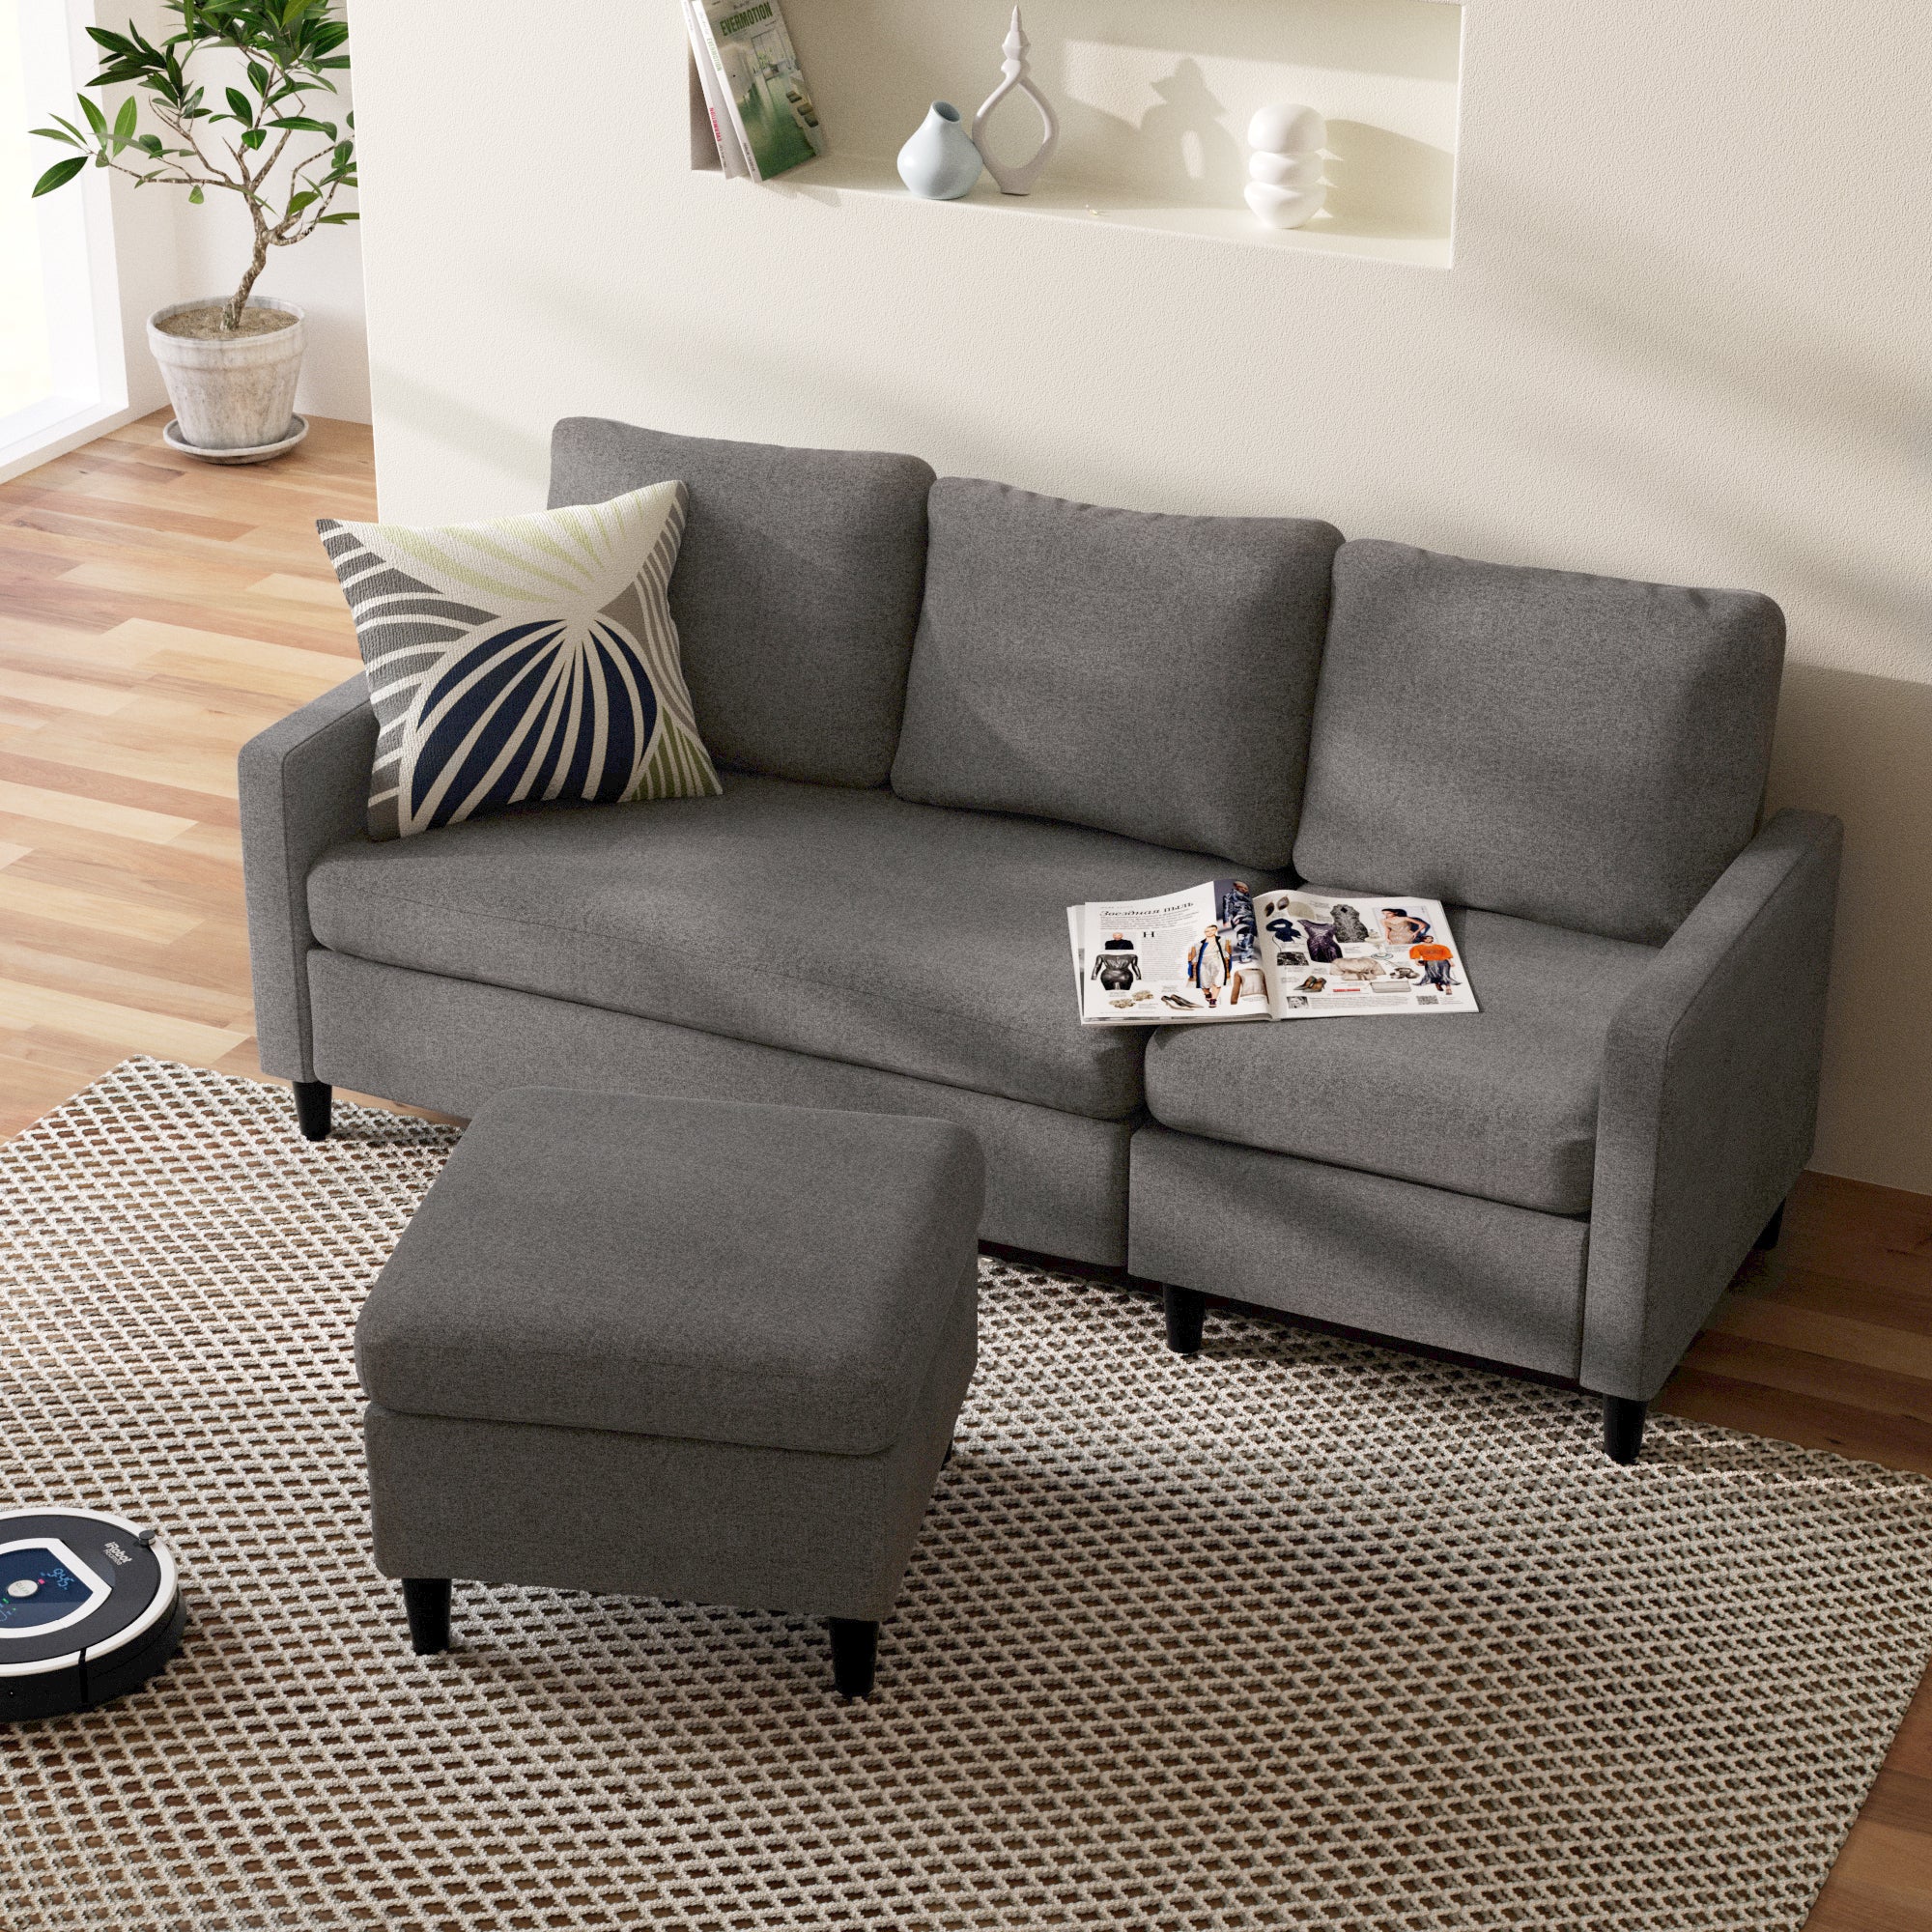 Hudson Convertible Sectional Sofa with Reversible Chaise